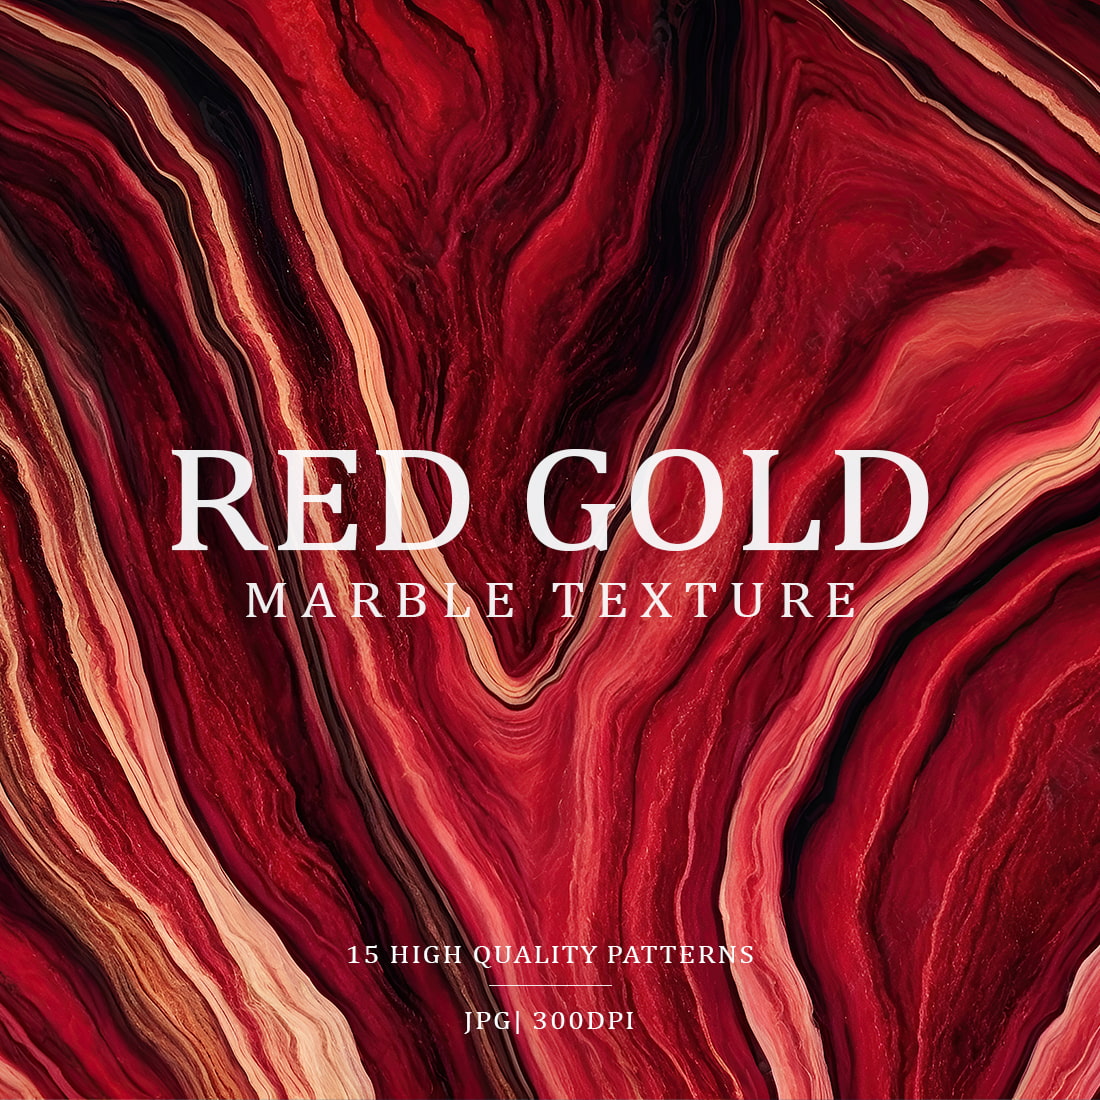 Red Gold Marble Textures cover image.